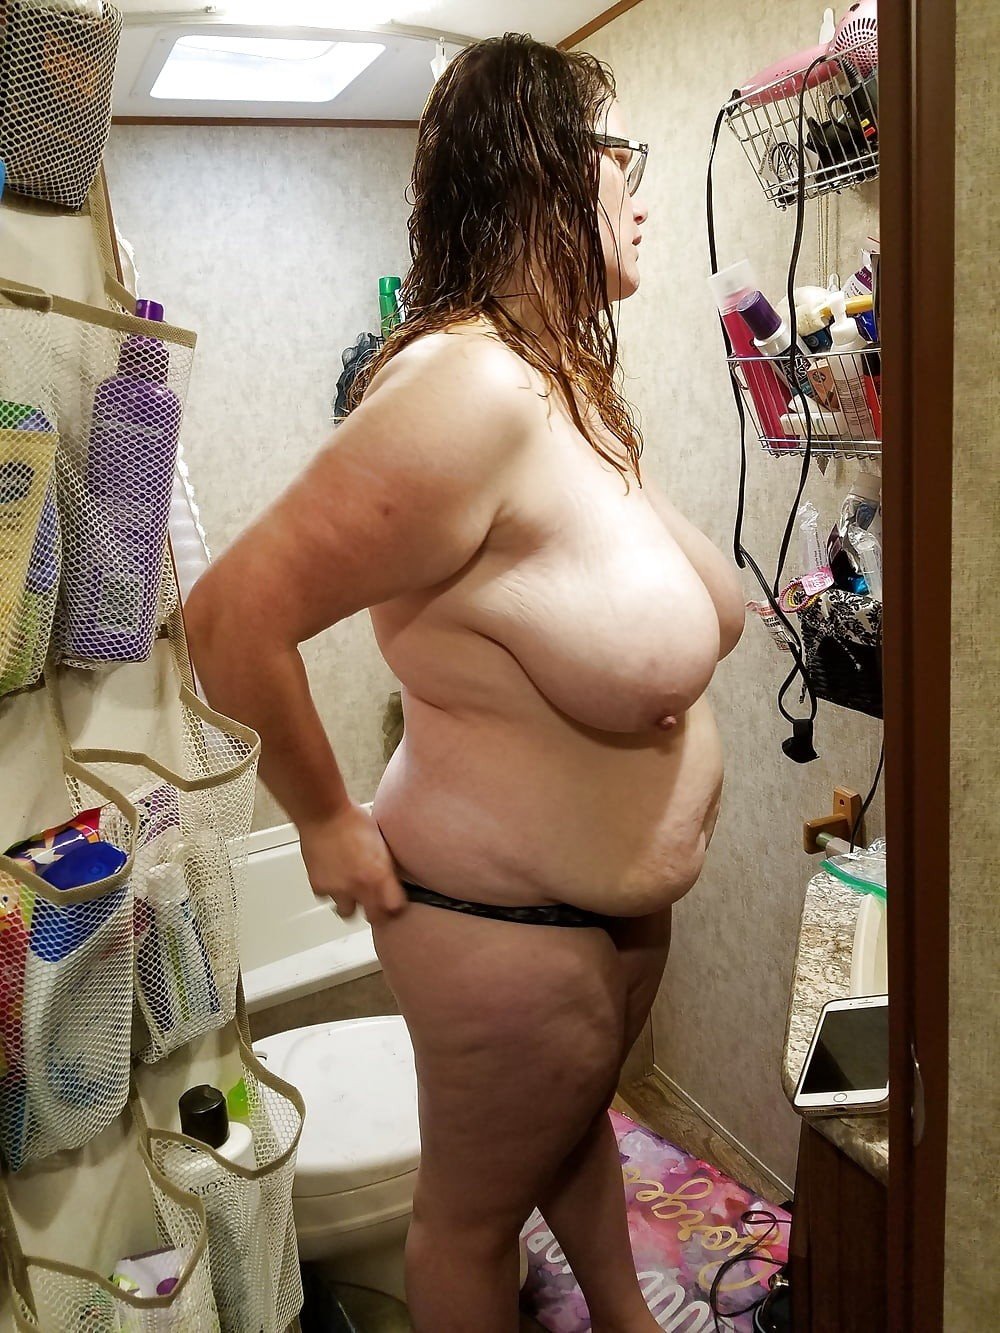 Mature BBW Amateur Mom is Big Tits milf in the Shower at Home